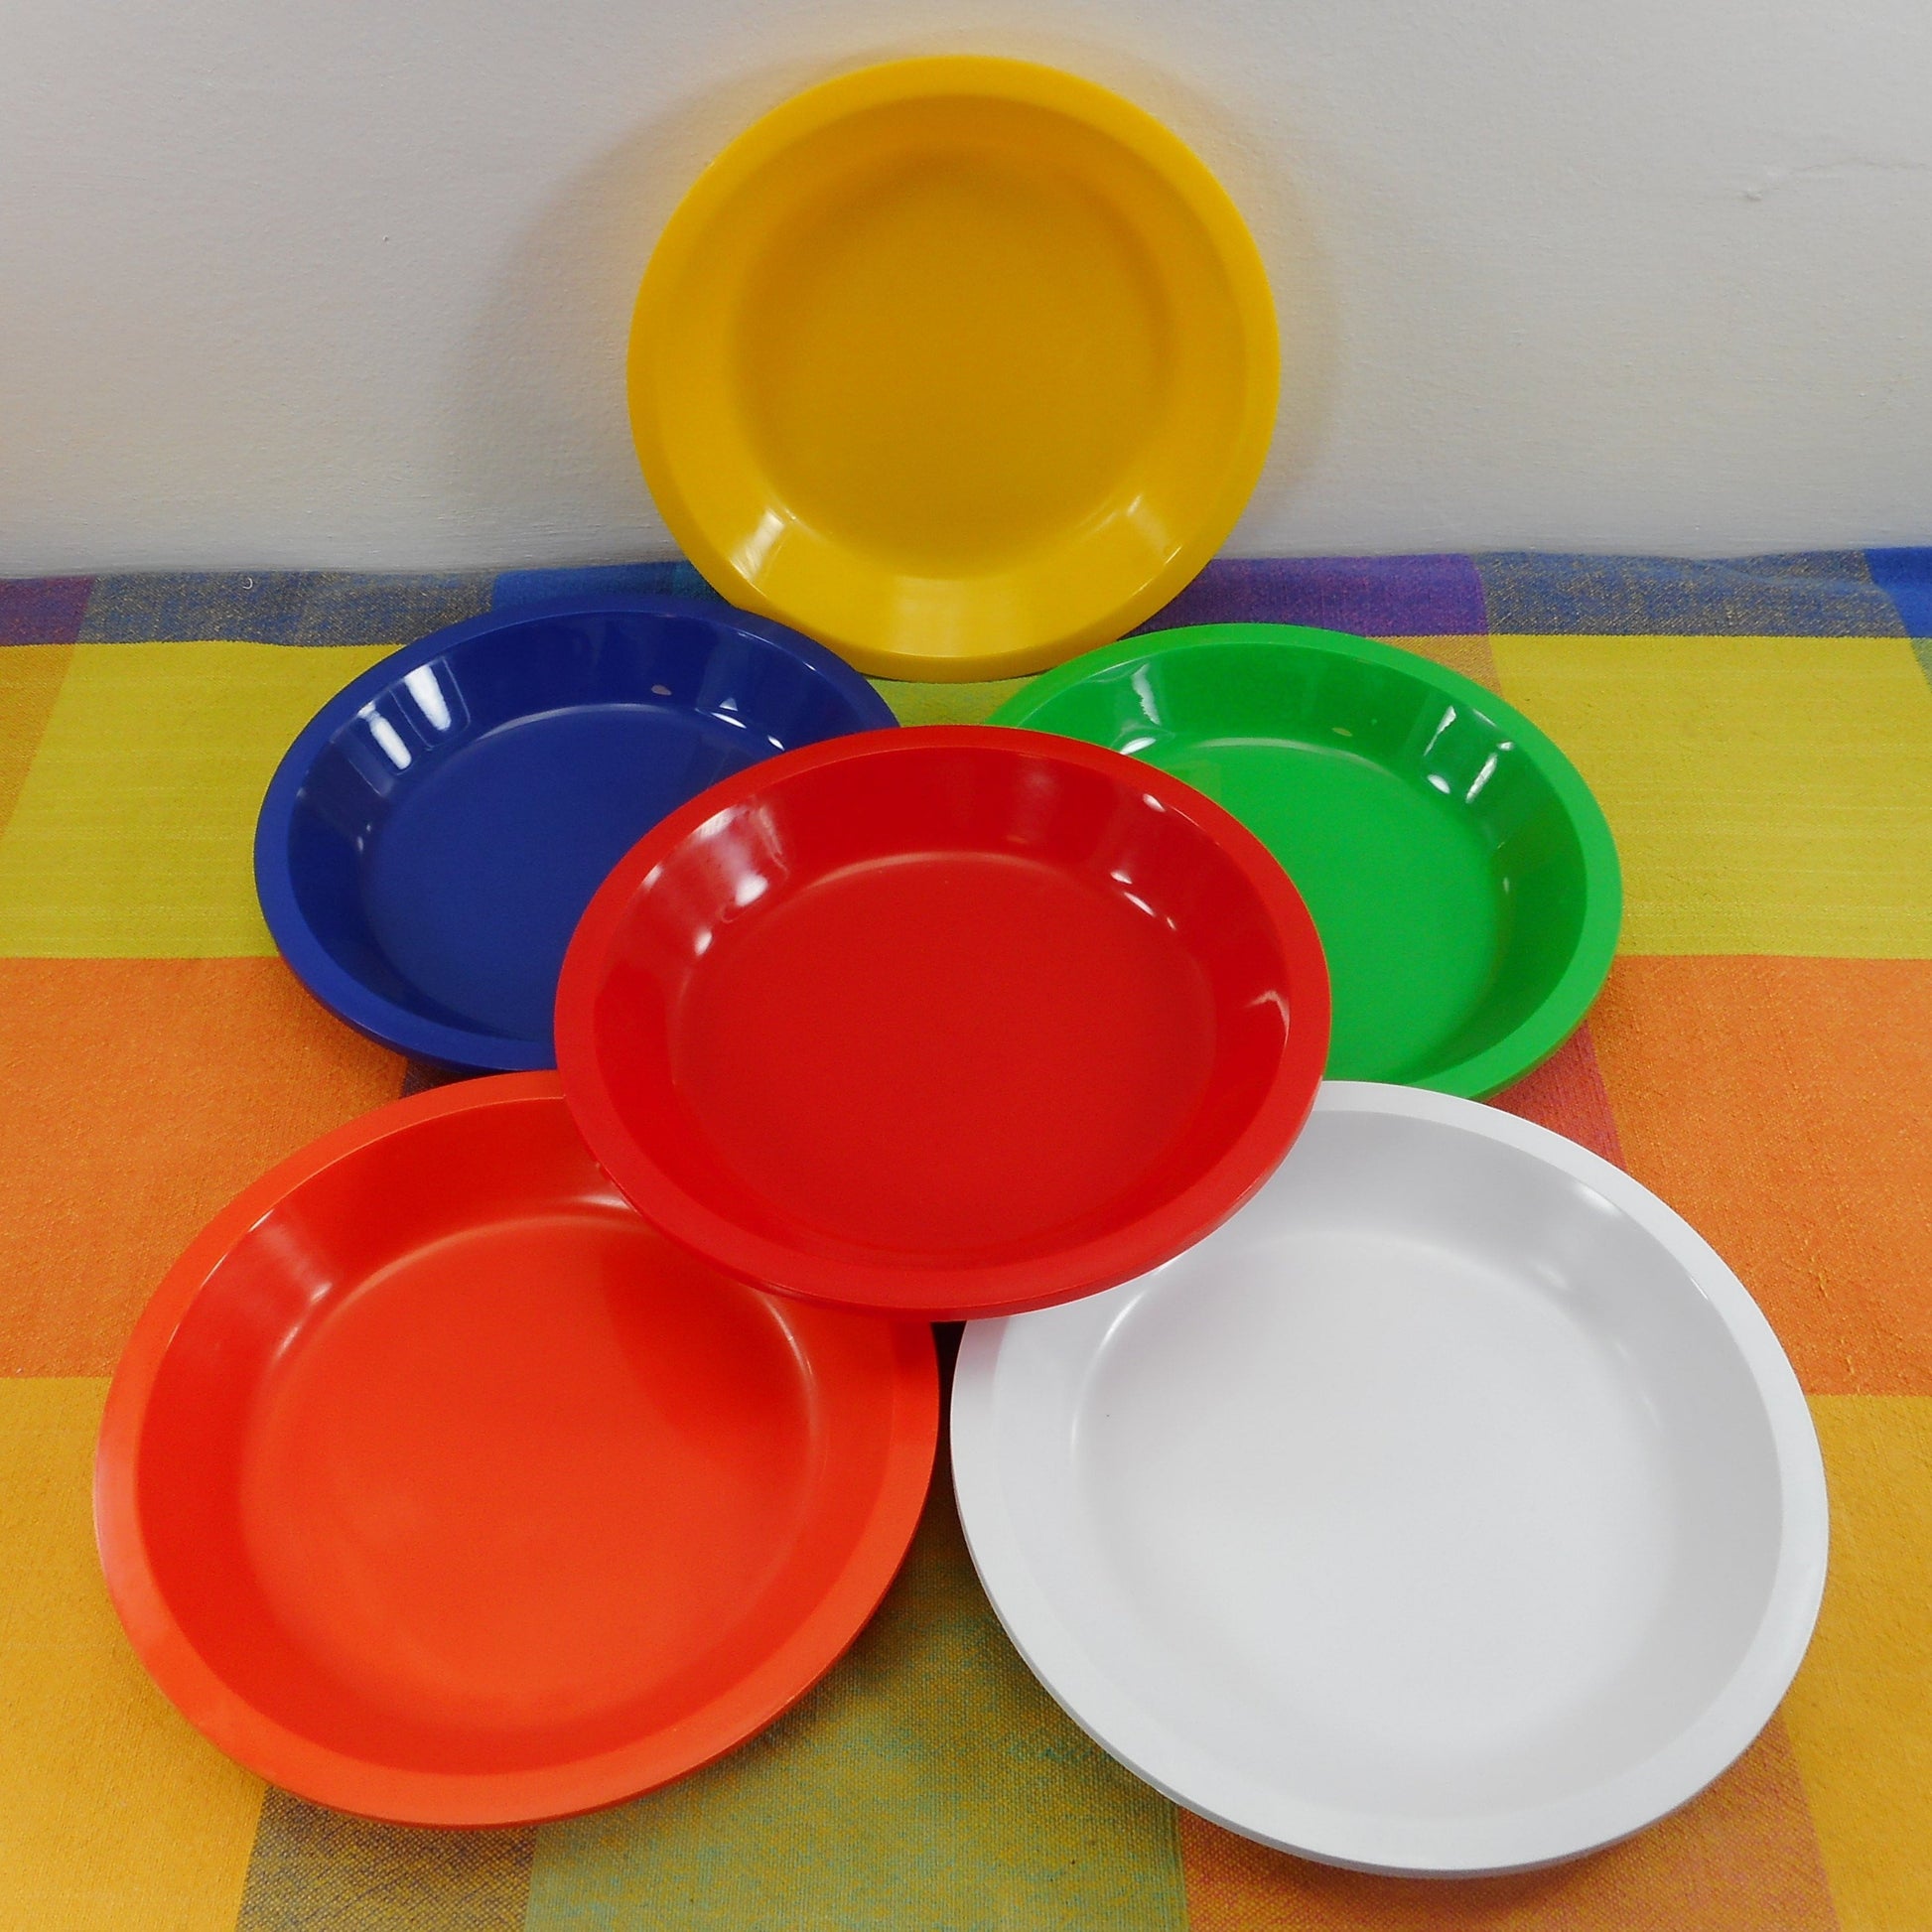 Ingrid Chicago Mod Plastic Party Ball Picnic Camping Set Replacement Part - Bowl 6-3/4"